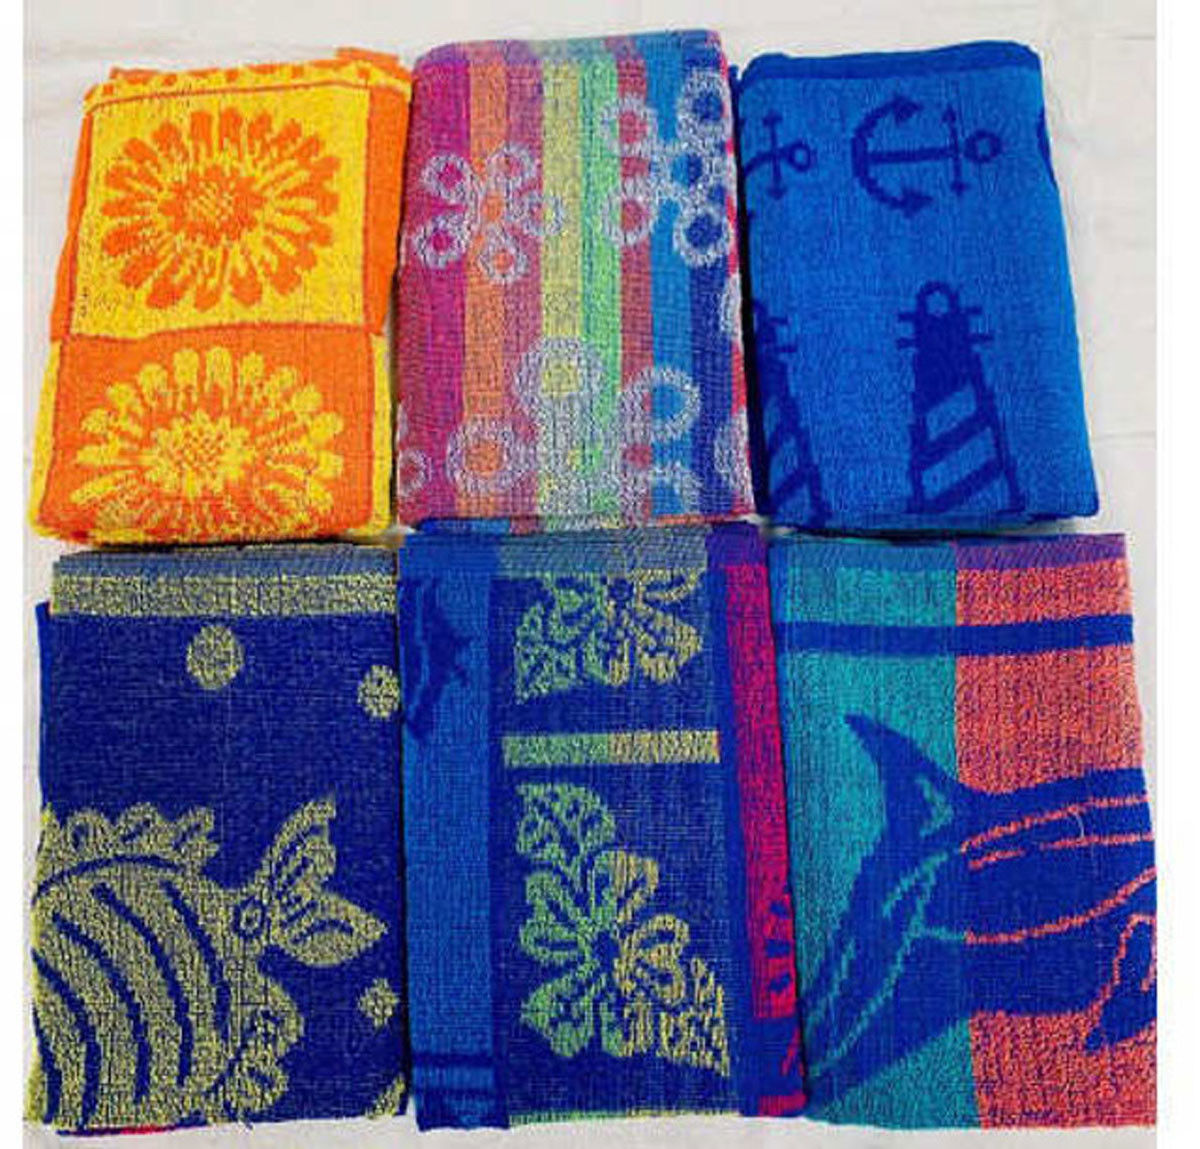 What type of dye is utilized for the Economy Pool Towels in the 6-pack design assortment?